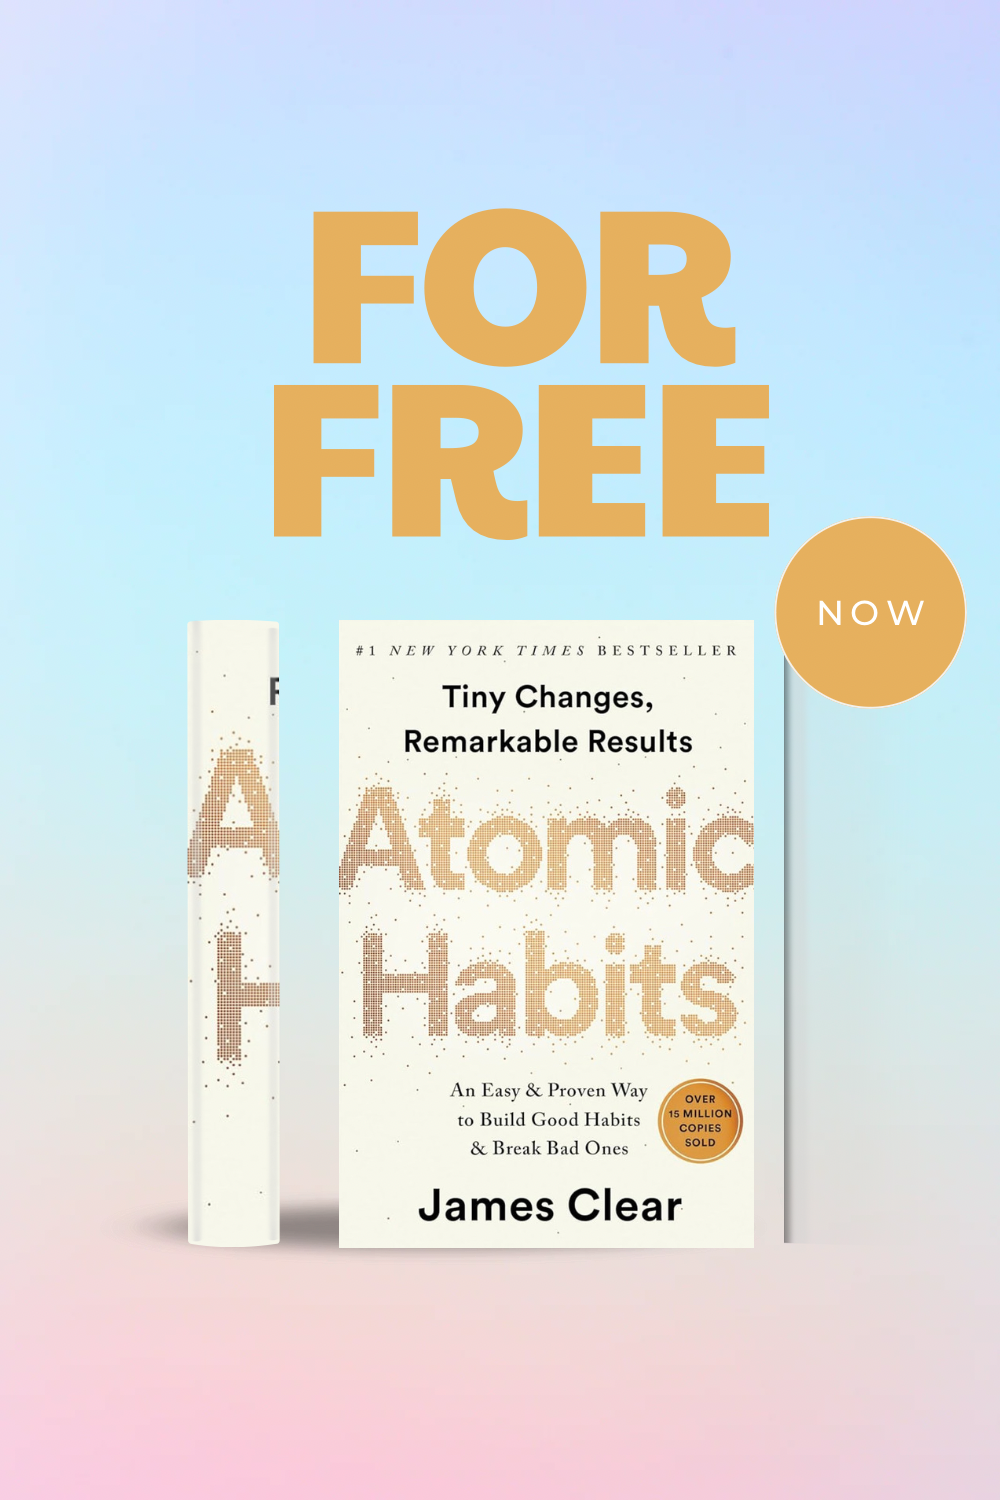 Book Summary - Atomic Habits (James Clear)